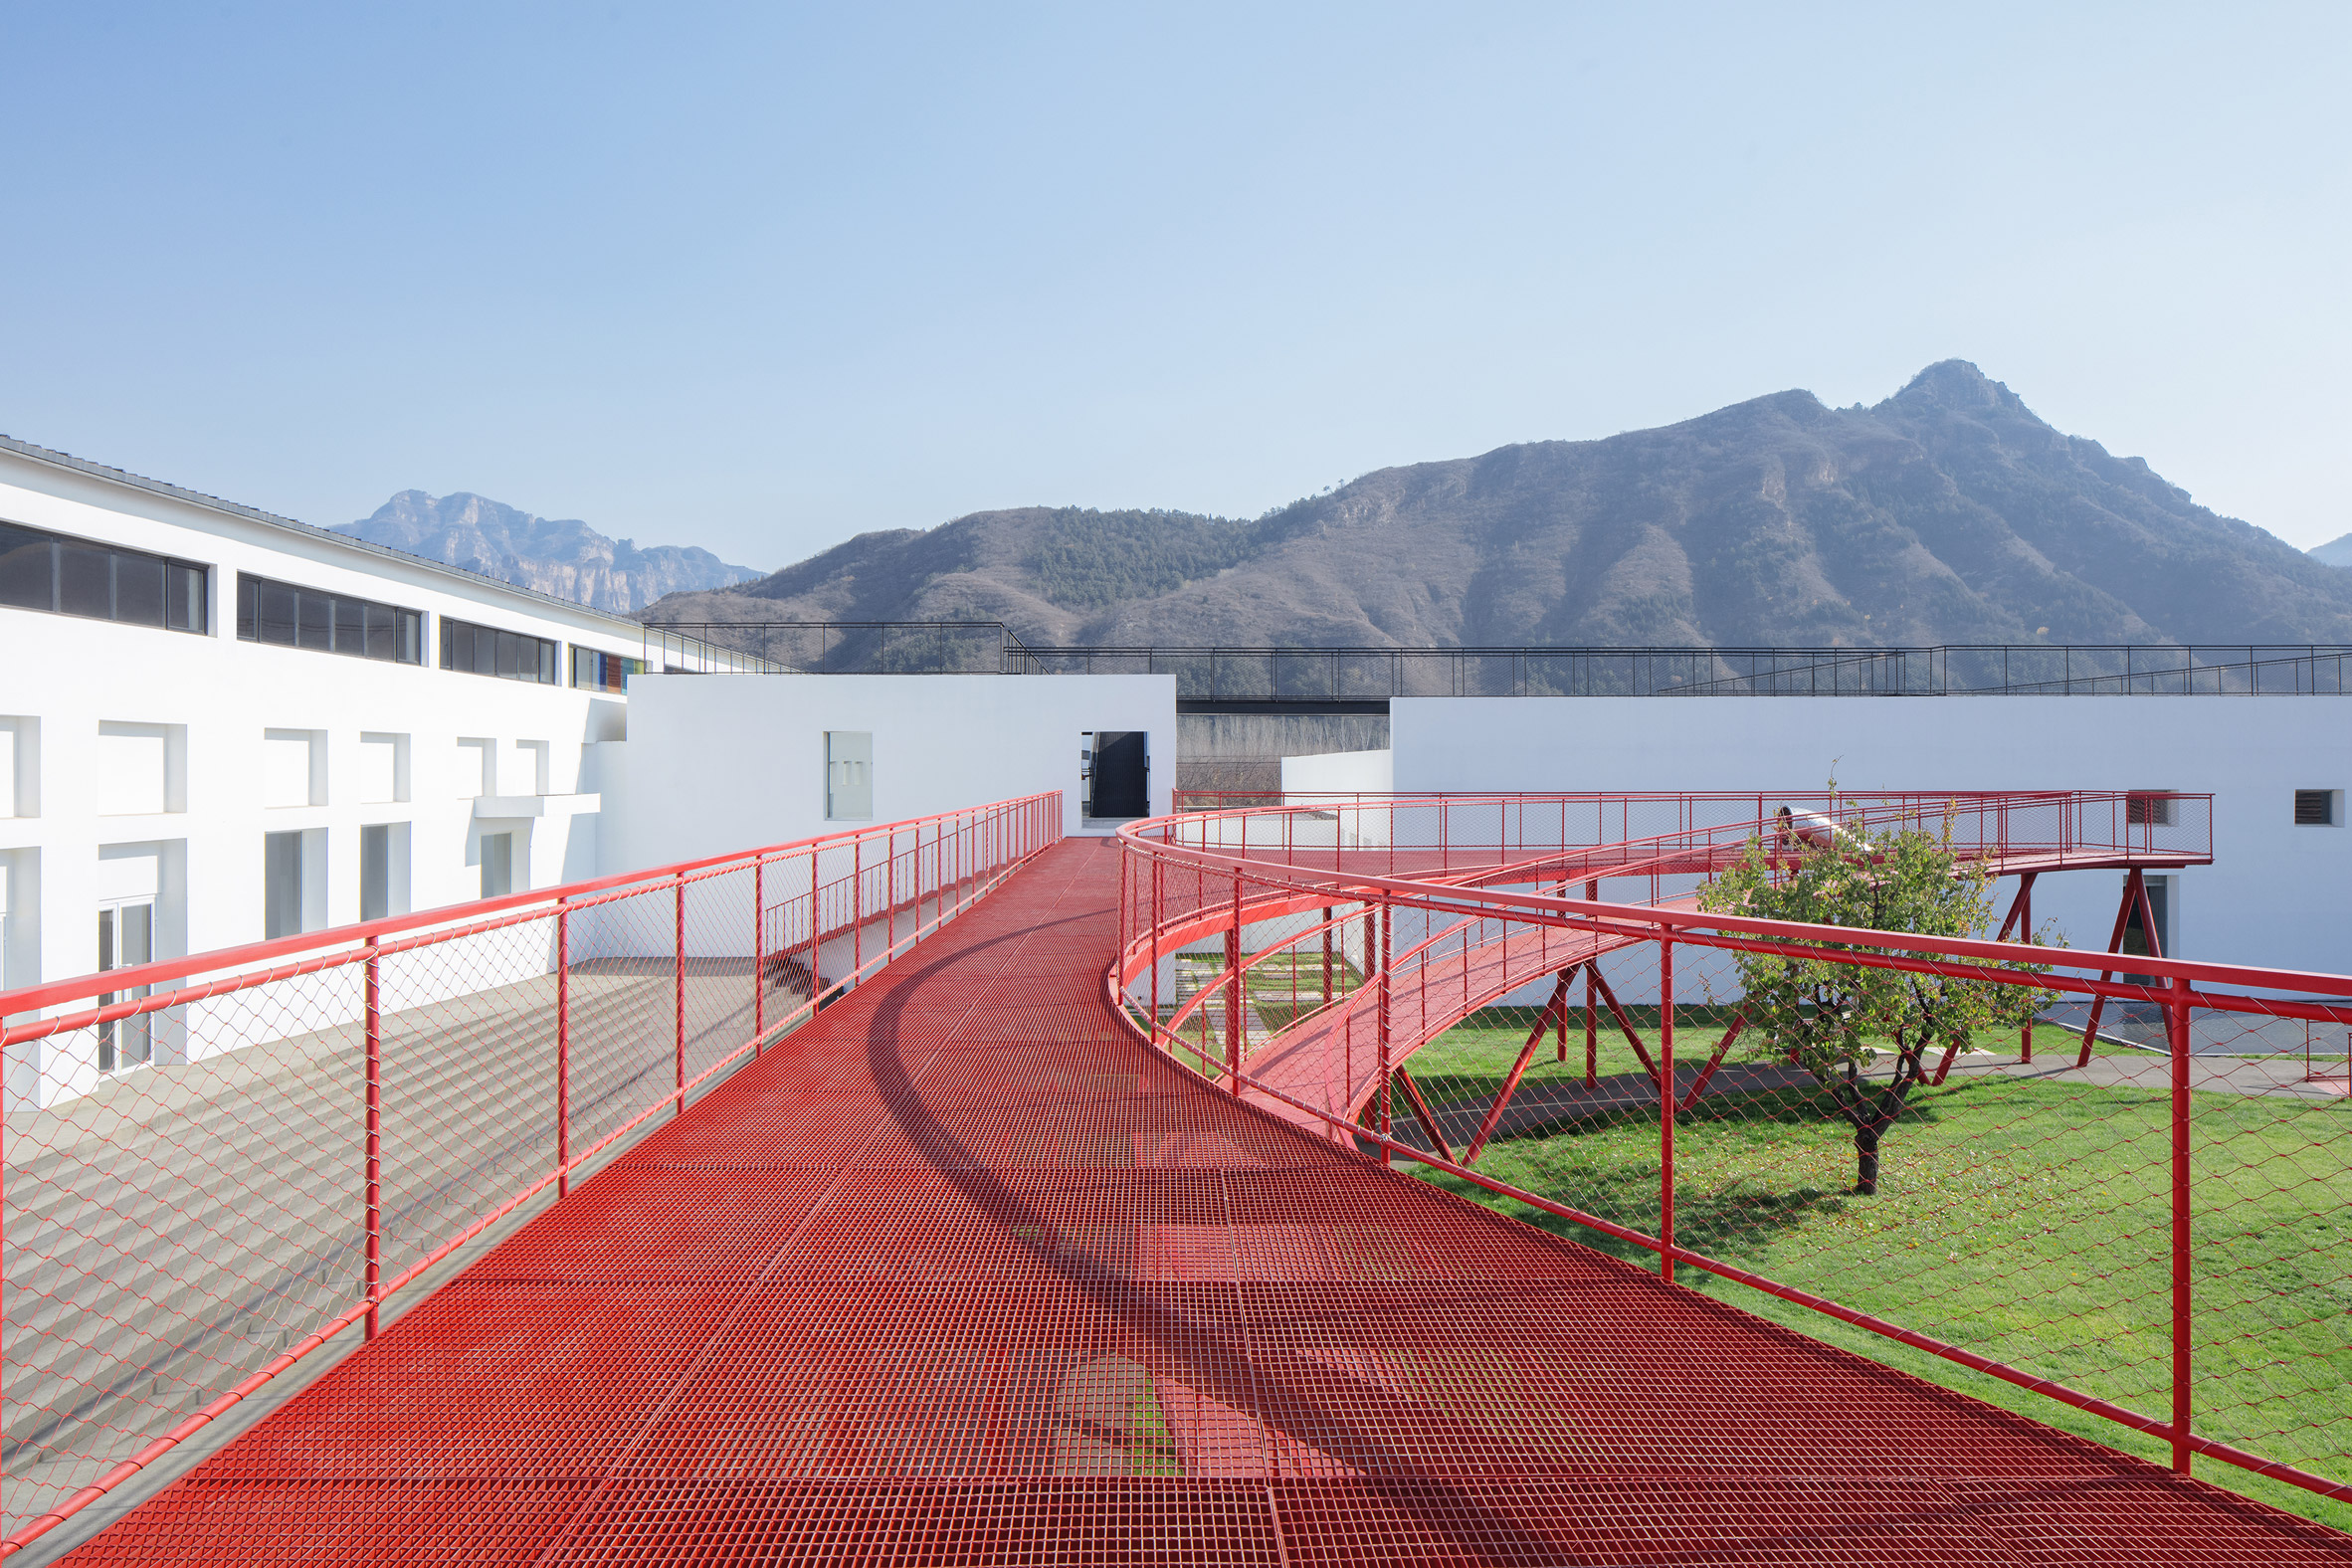 An elevated walkway at a youth centre in China